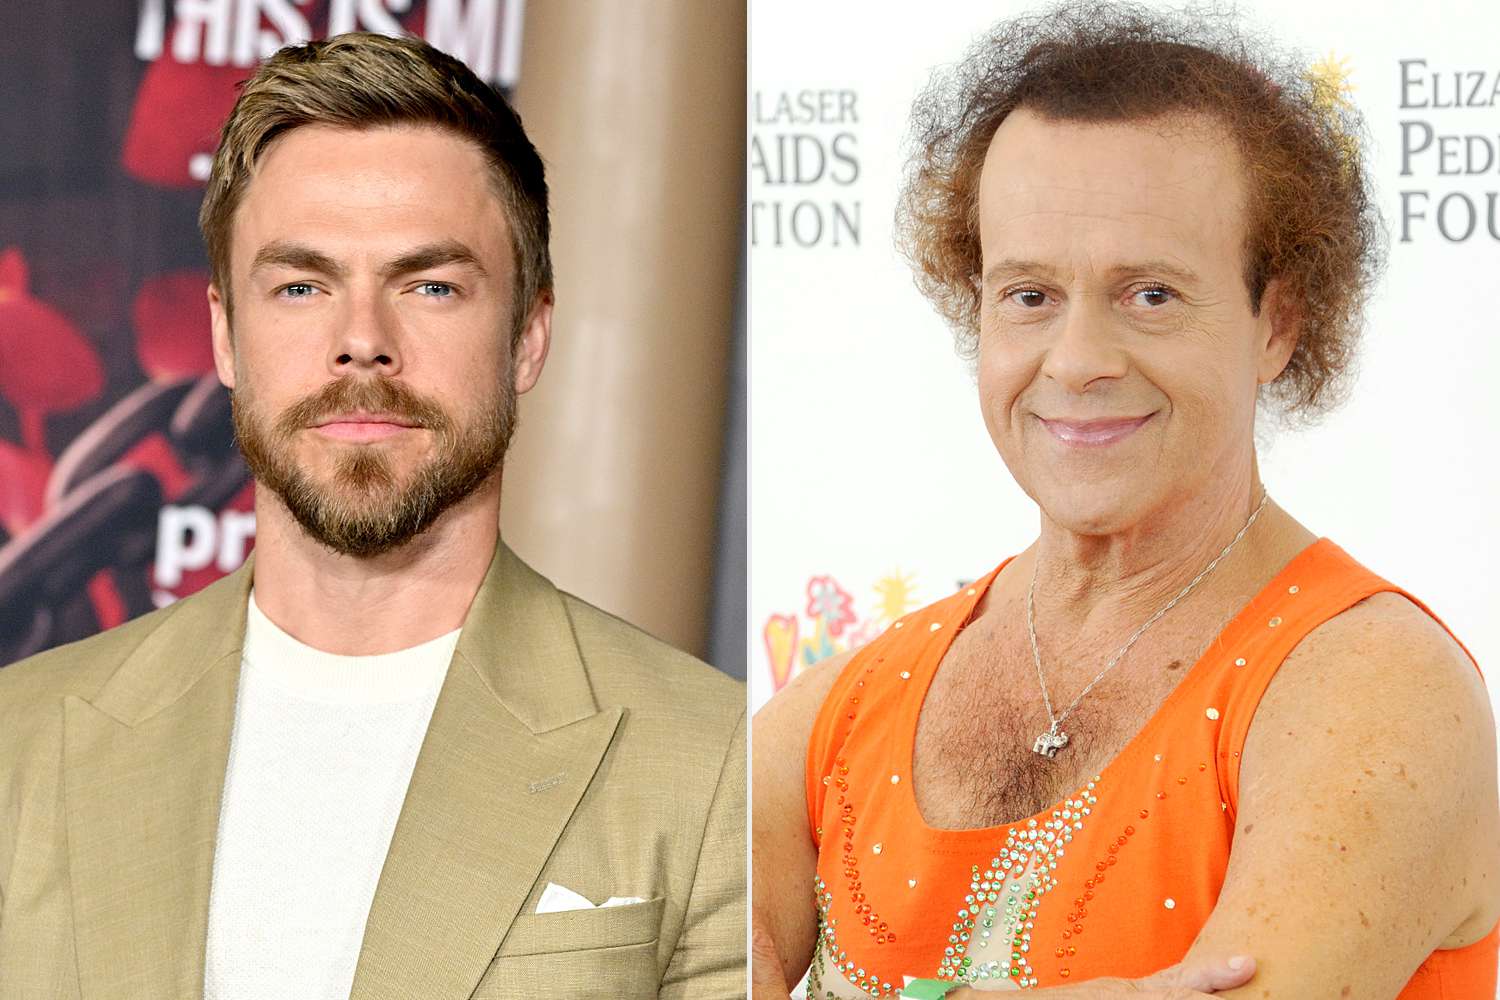 How Richard Simmons Boosted Derek Hough’s Confidence on 'DWTS' with an Impromptu Song About His 'Perfect Hair'